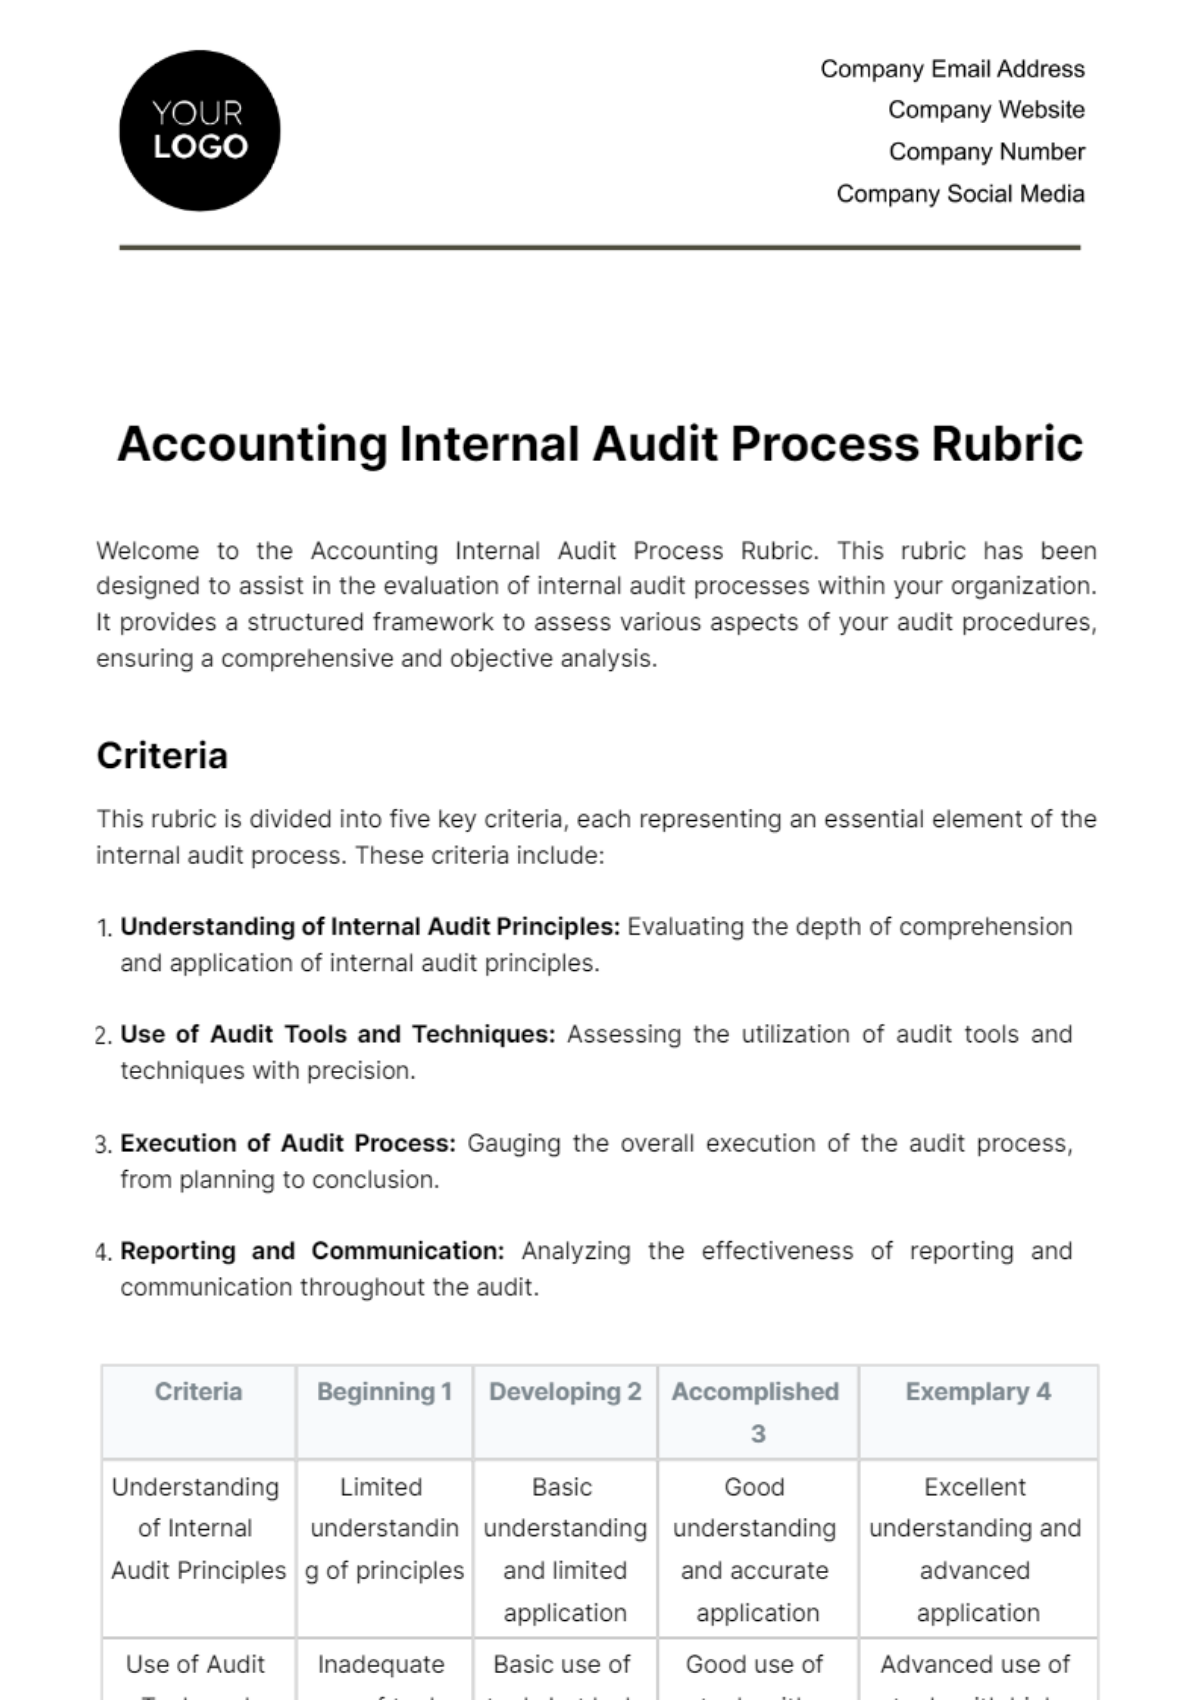 Accounting Internal Audit Process Rubric Template